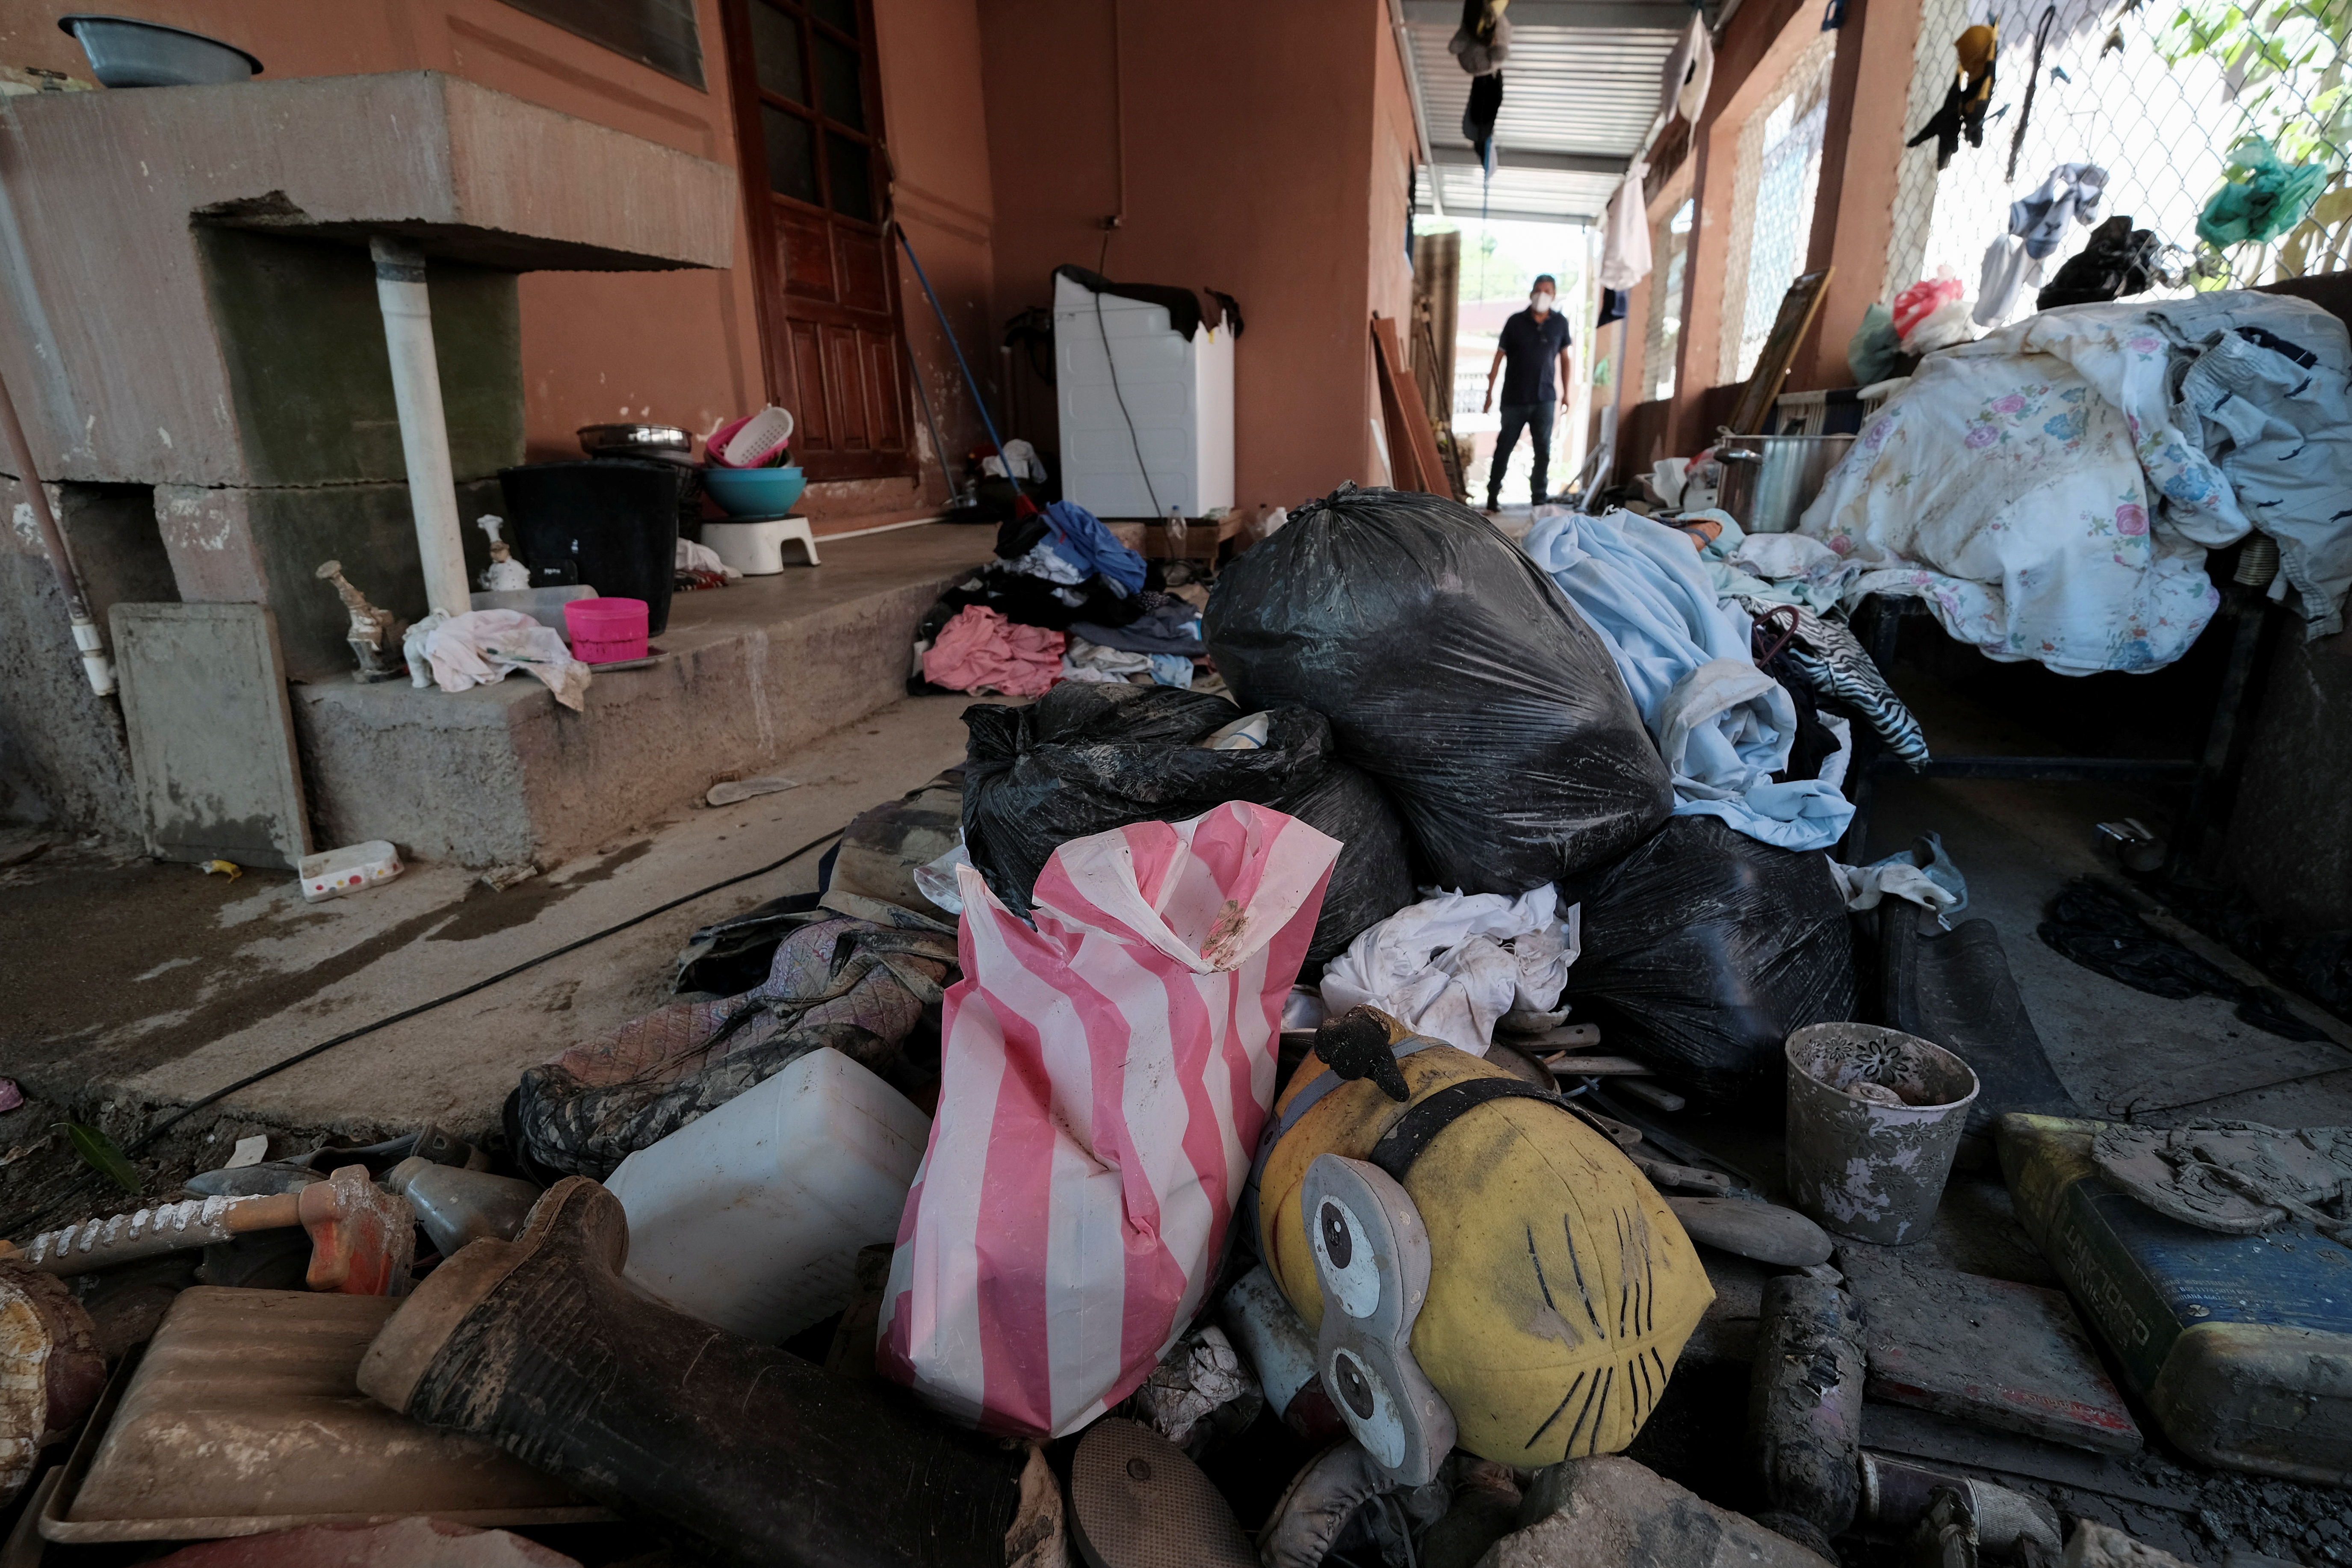 Plastic bags containing clothing are pictured at a house damaged by the floods caused by the hurricanes Eta and Iota at her house, in La Lima, Honduras March 26, 2021. Picture taken March 26, 2021. REUTERS/Yoseph Amaya 